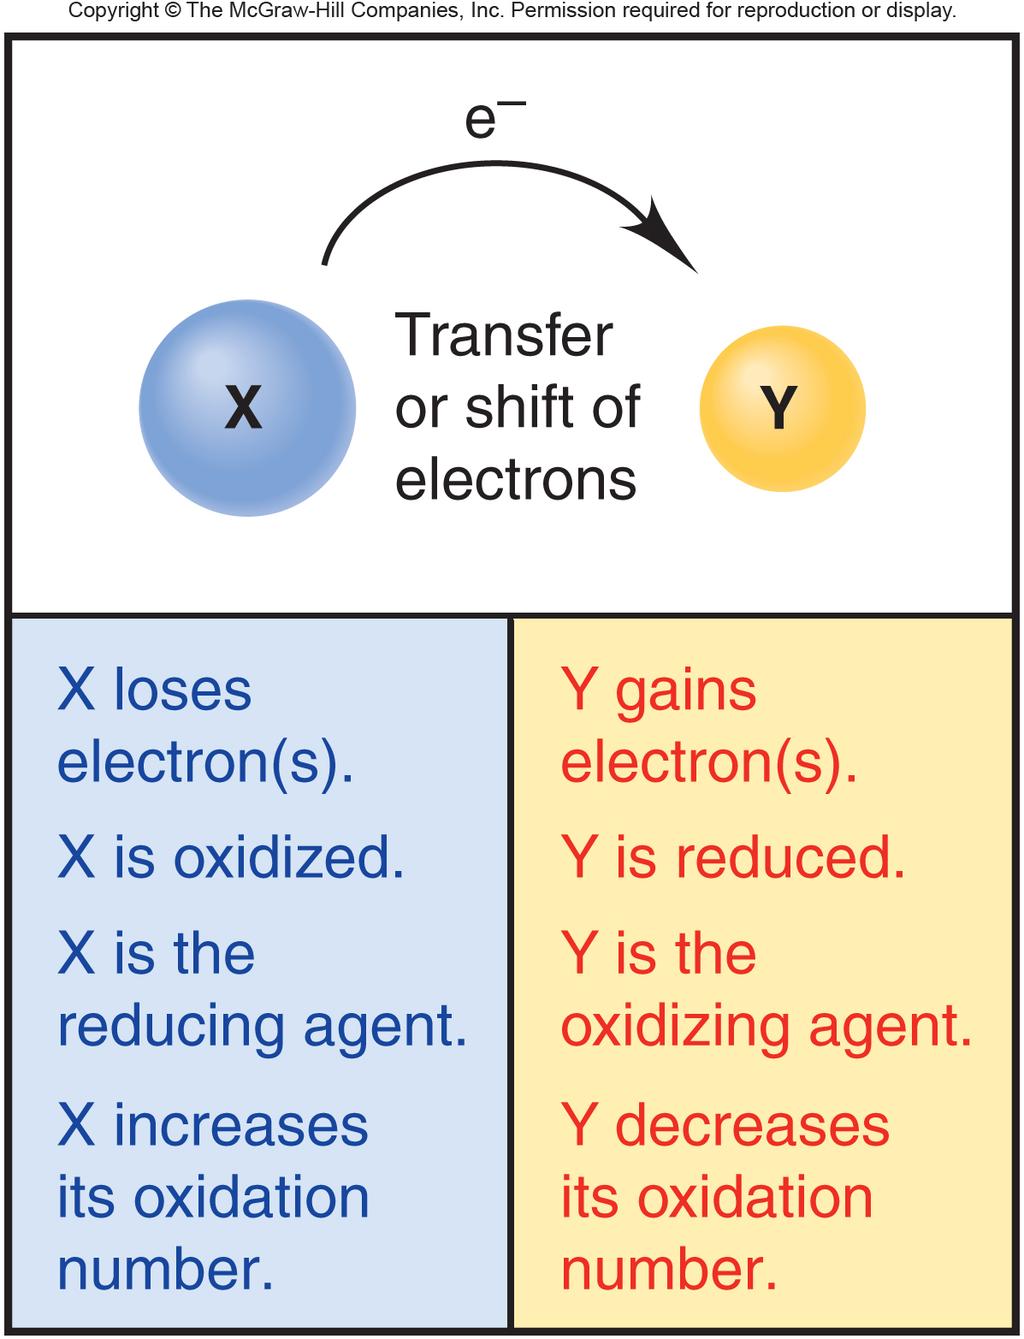 Oxidation-Reduction Definitions 2Na(s) + Cl 2 (g) à 2NaCl(s) X = Na Na loses electronsà is oxidized (ox # increases, becomes more posi+ve)